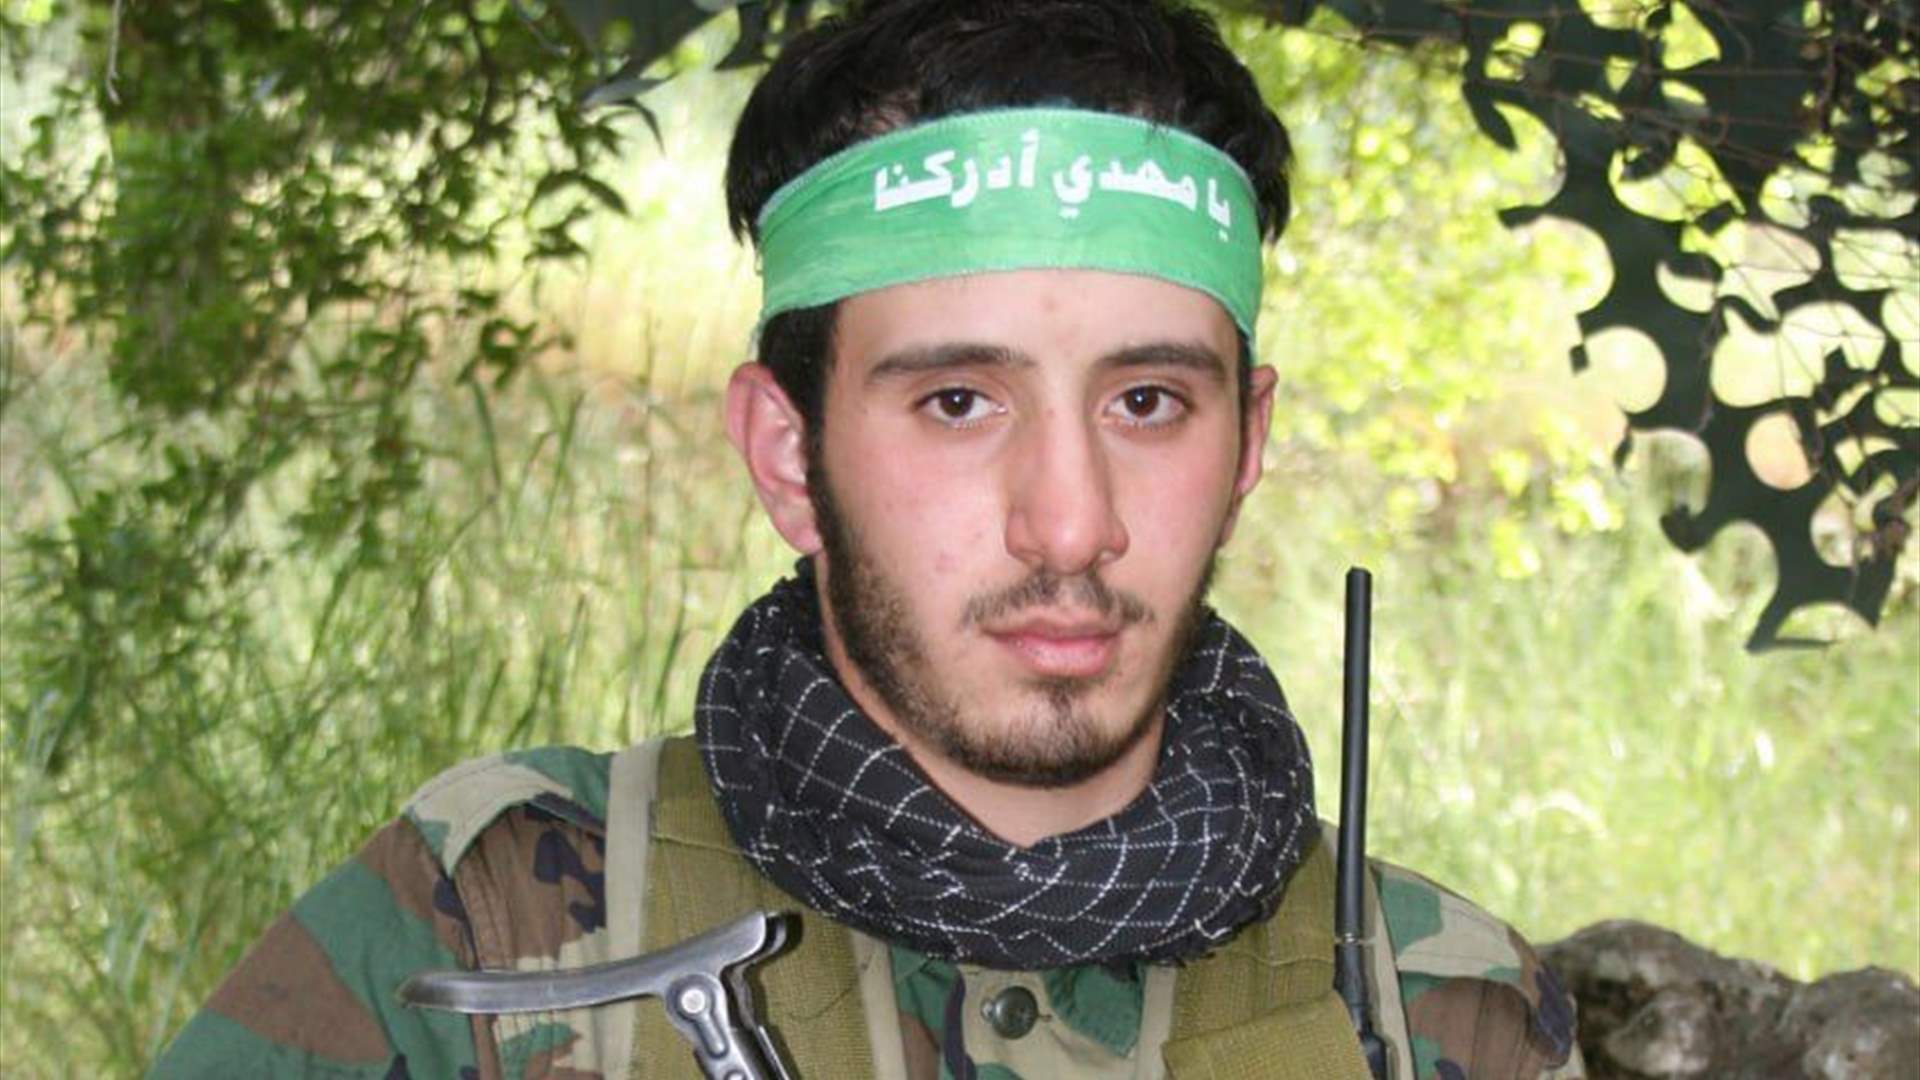 Hezbollah mourns its second member, Ali Raef Ftouni, due to Israeli aggression